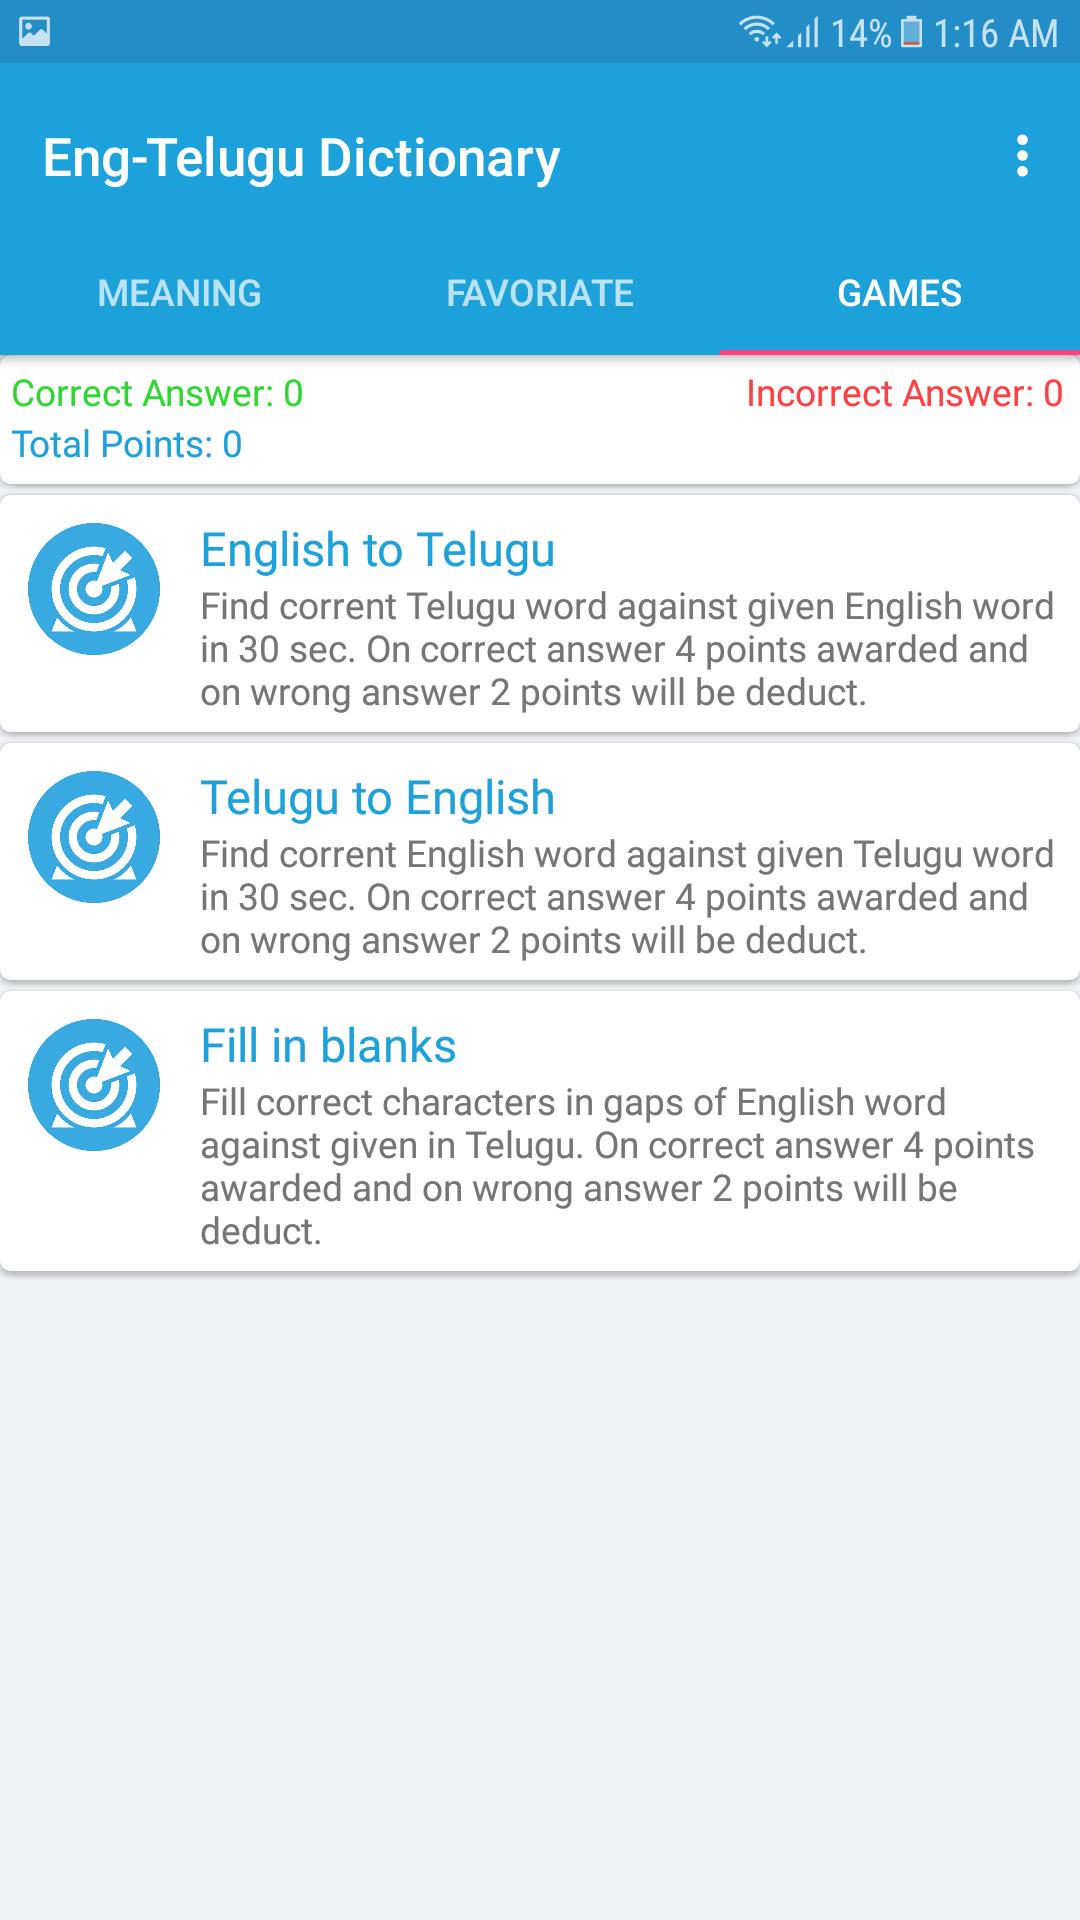 English Telugu Dictionary For Android Apk Download